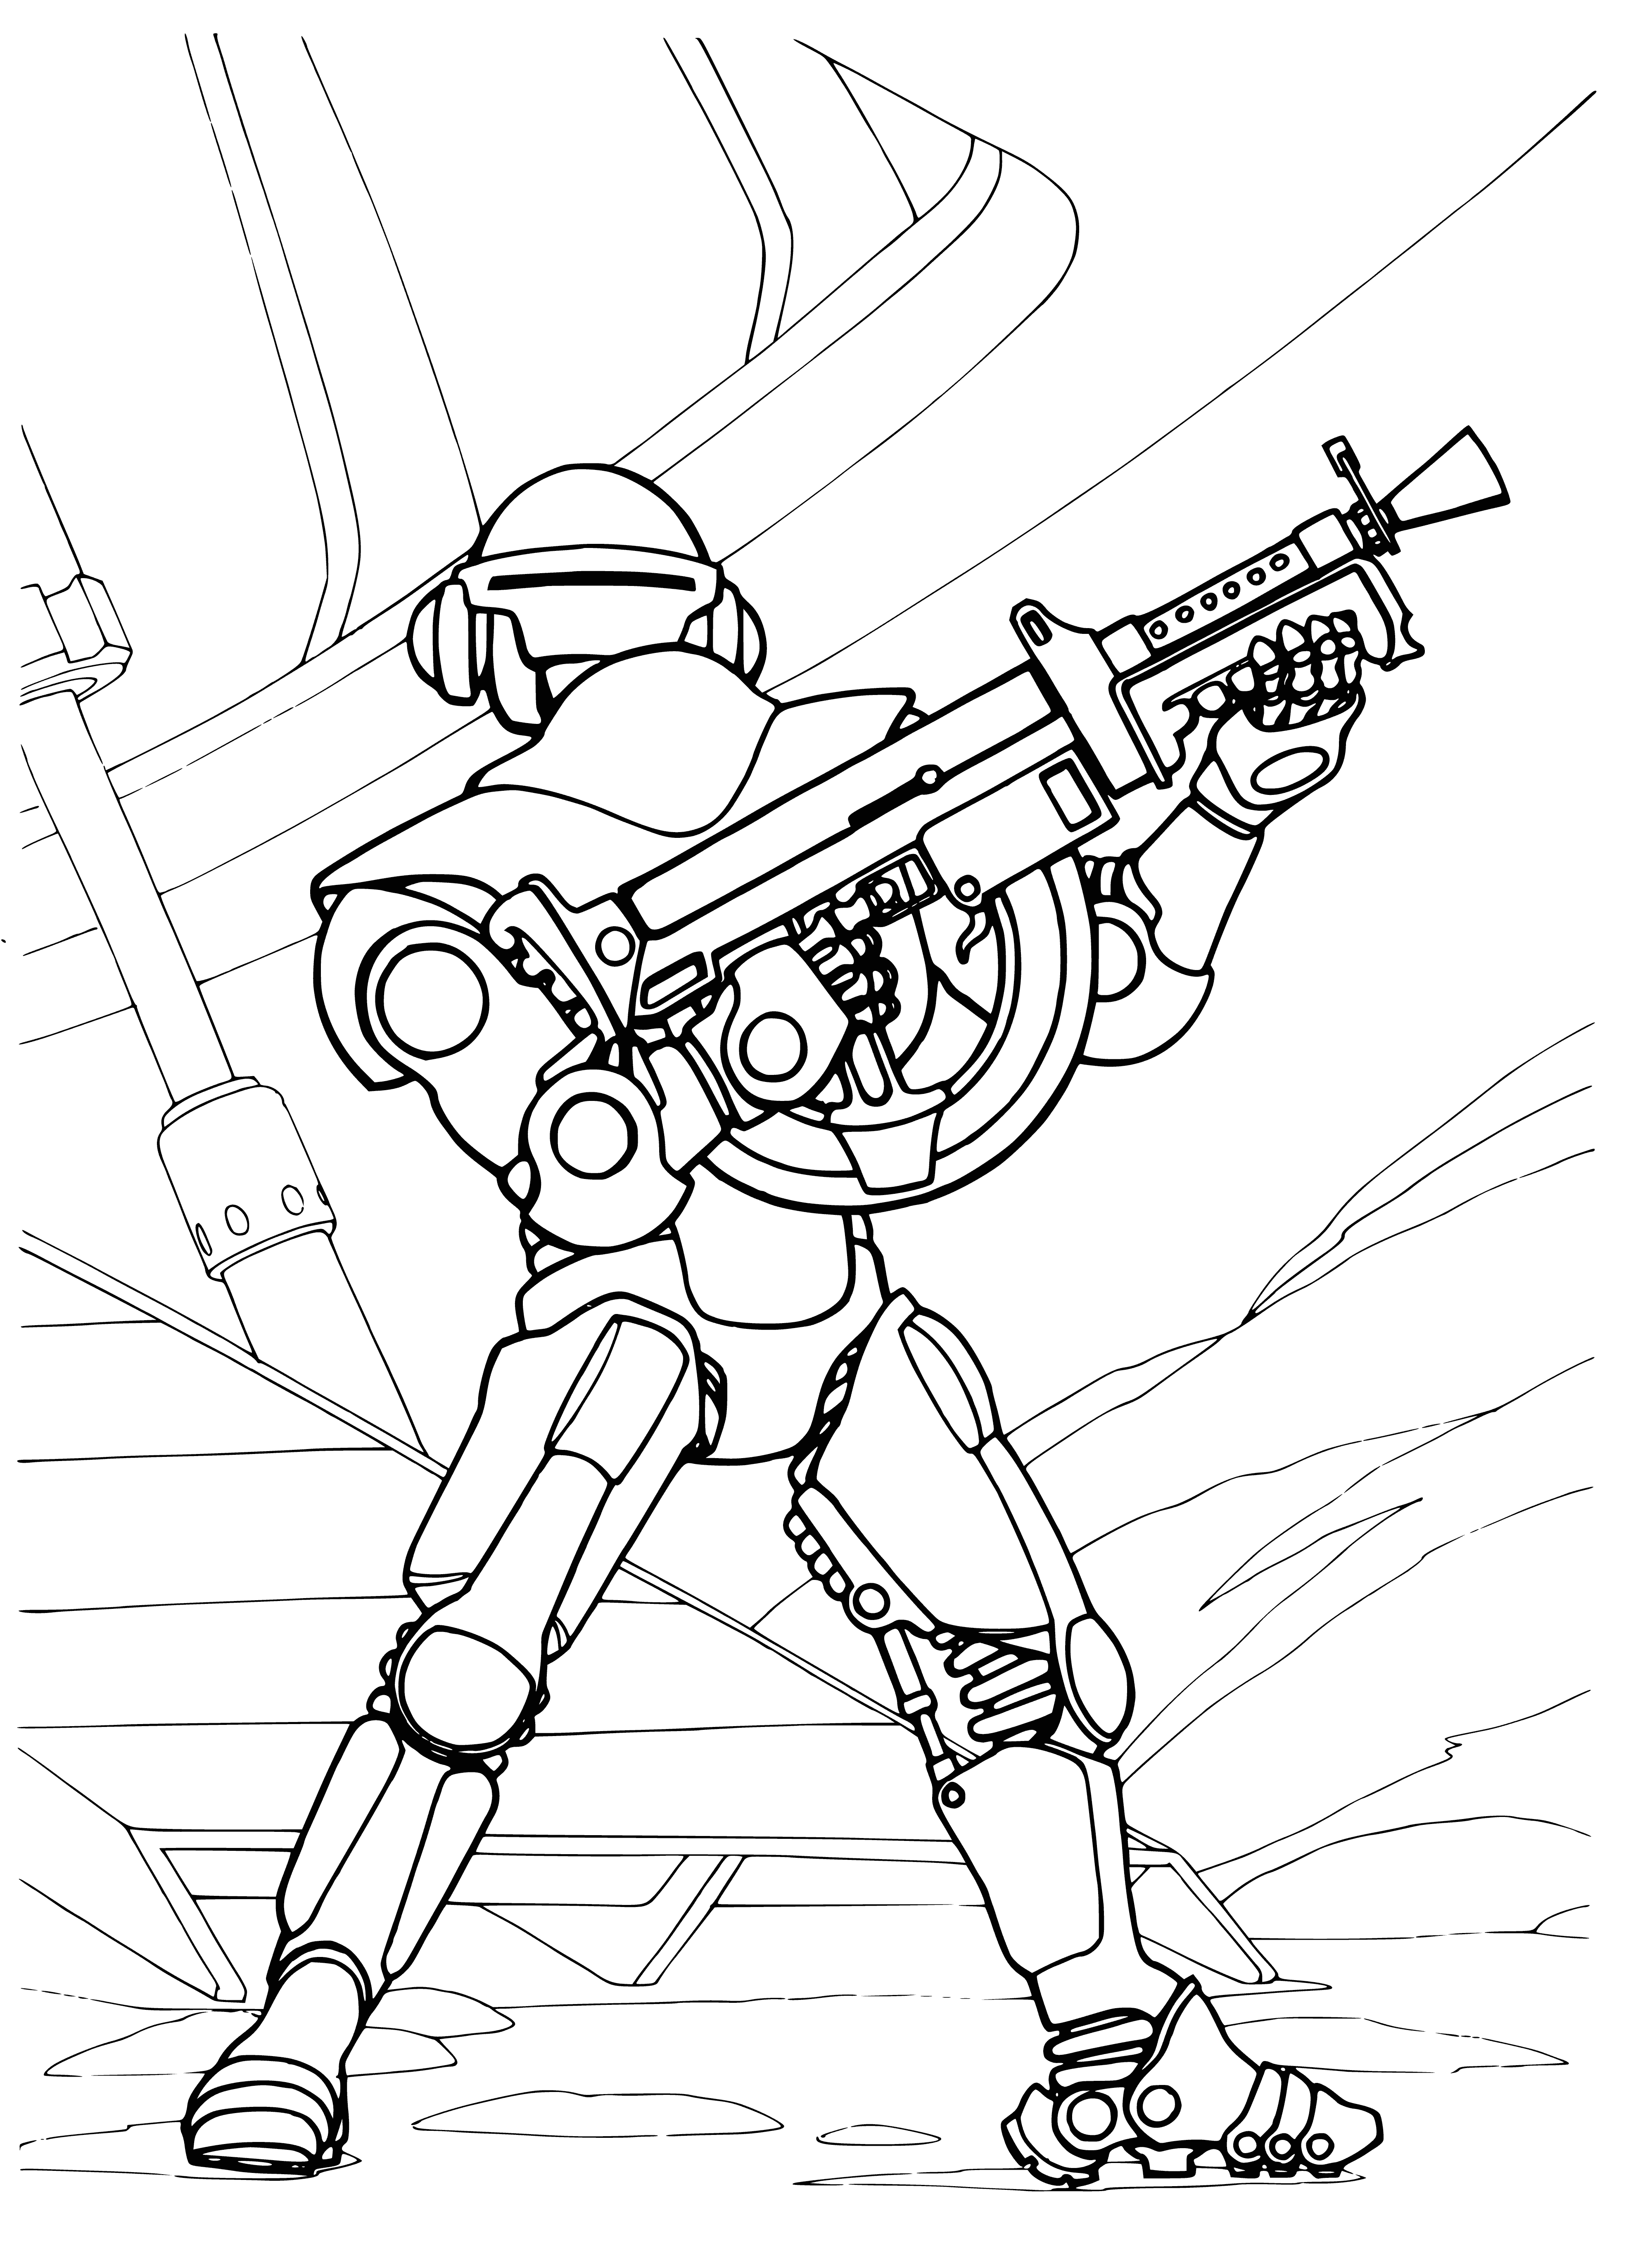 coloring page: Wars of the future will be fought by infantry with modern weaponry and armor, moving stealthily across the battlefield. #futurewarfare